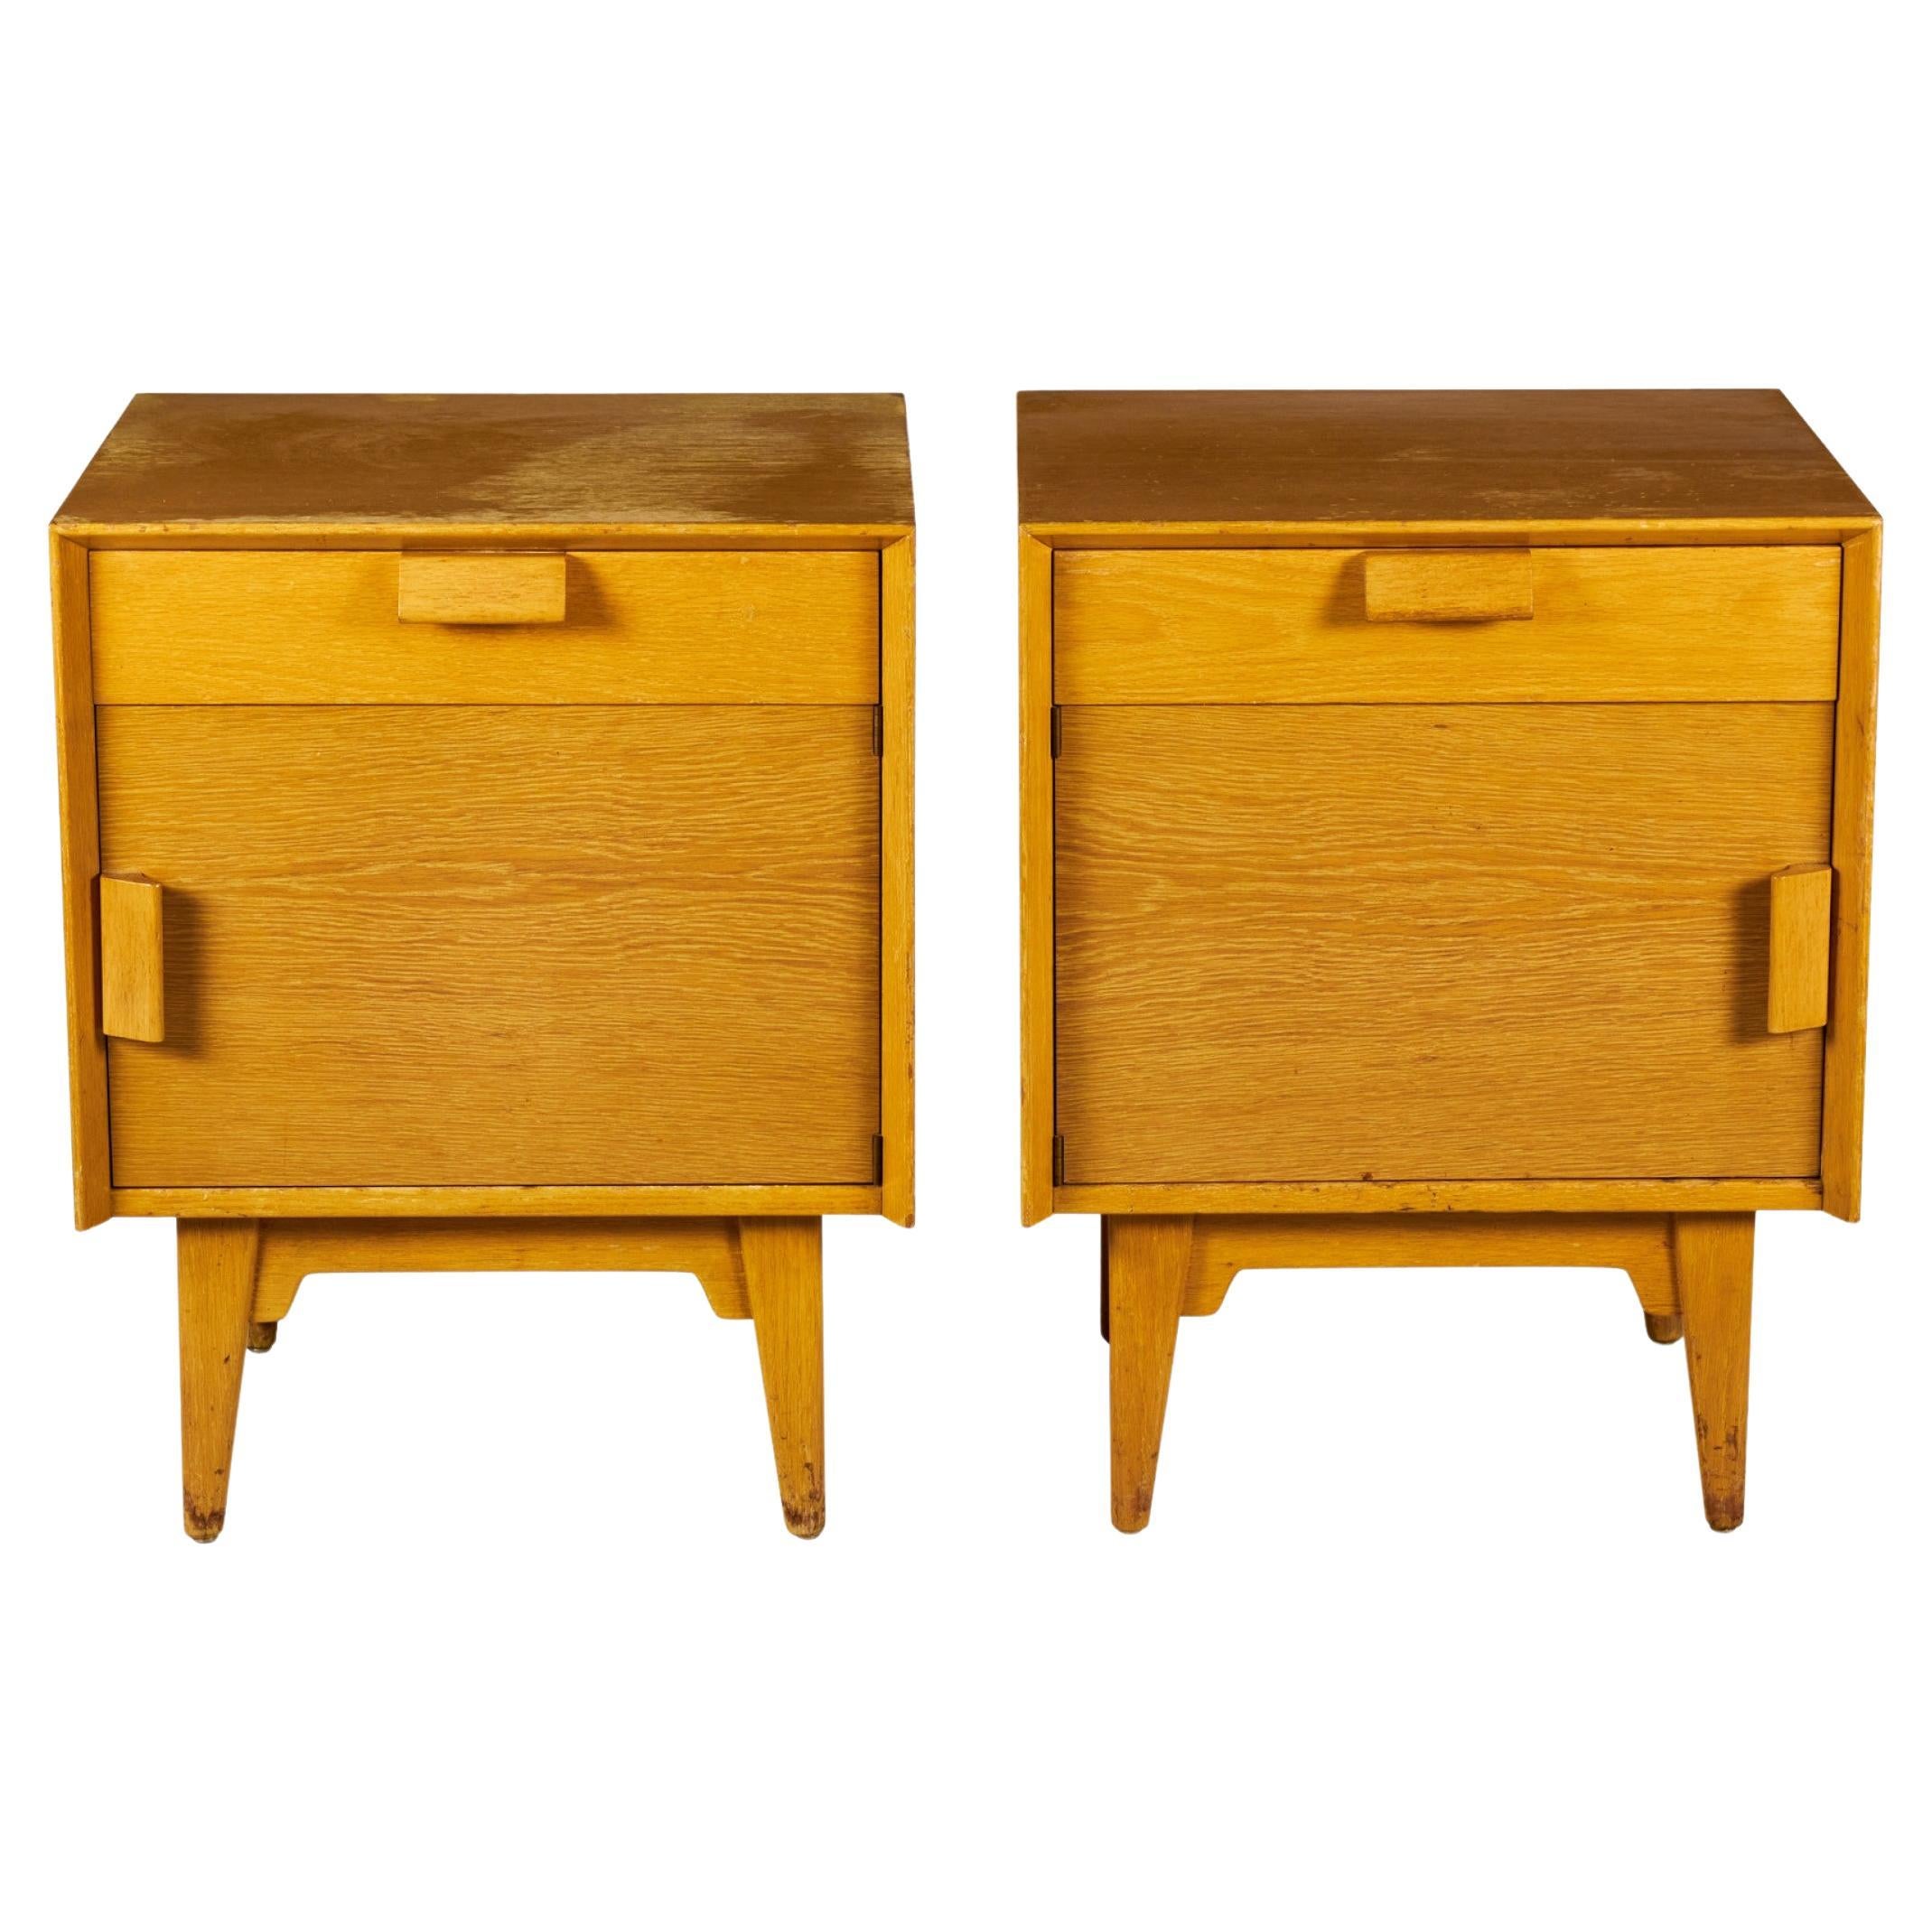 Pair of Jens Risom Danish Mid-Century Blond Oak Bedside Table / Commodes For Sale